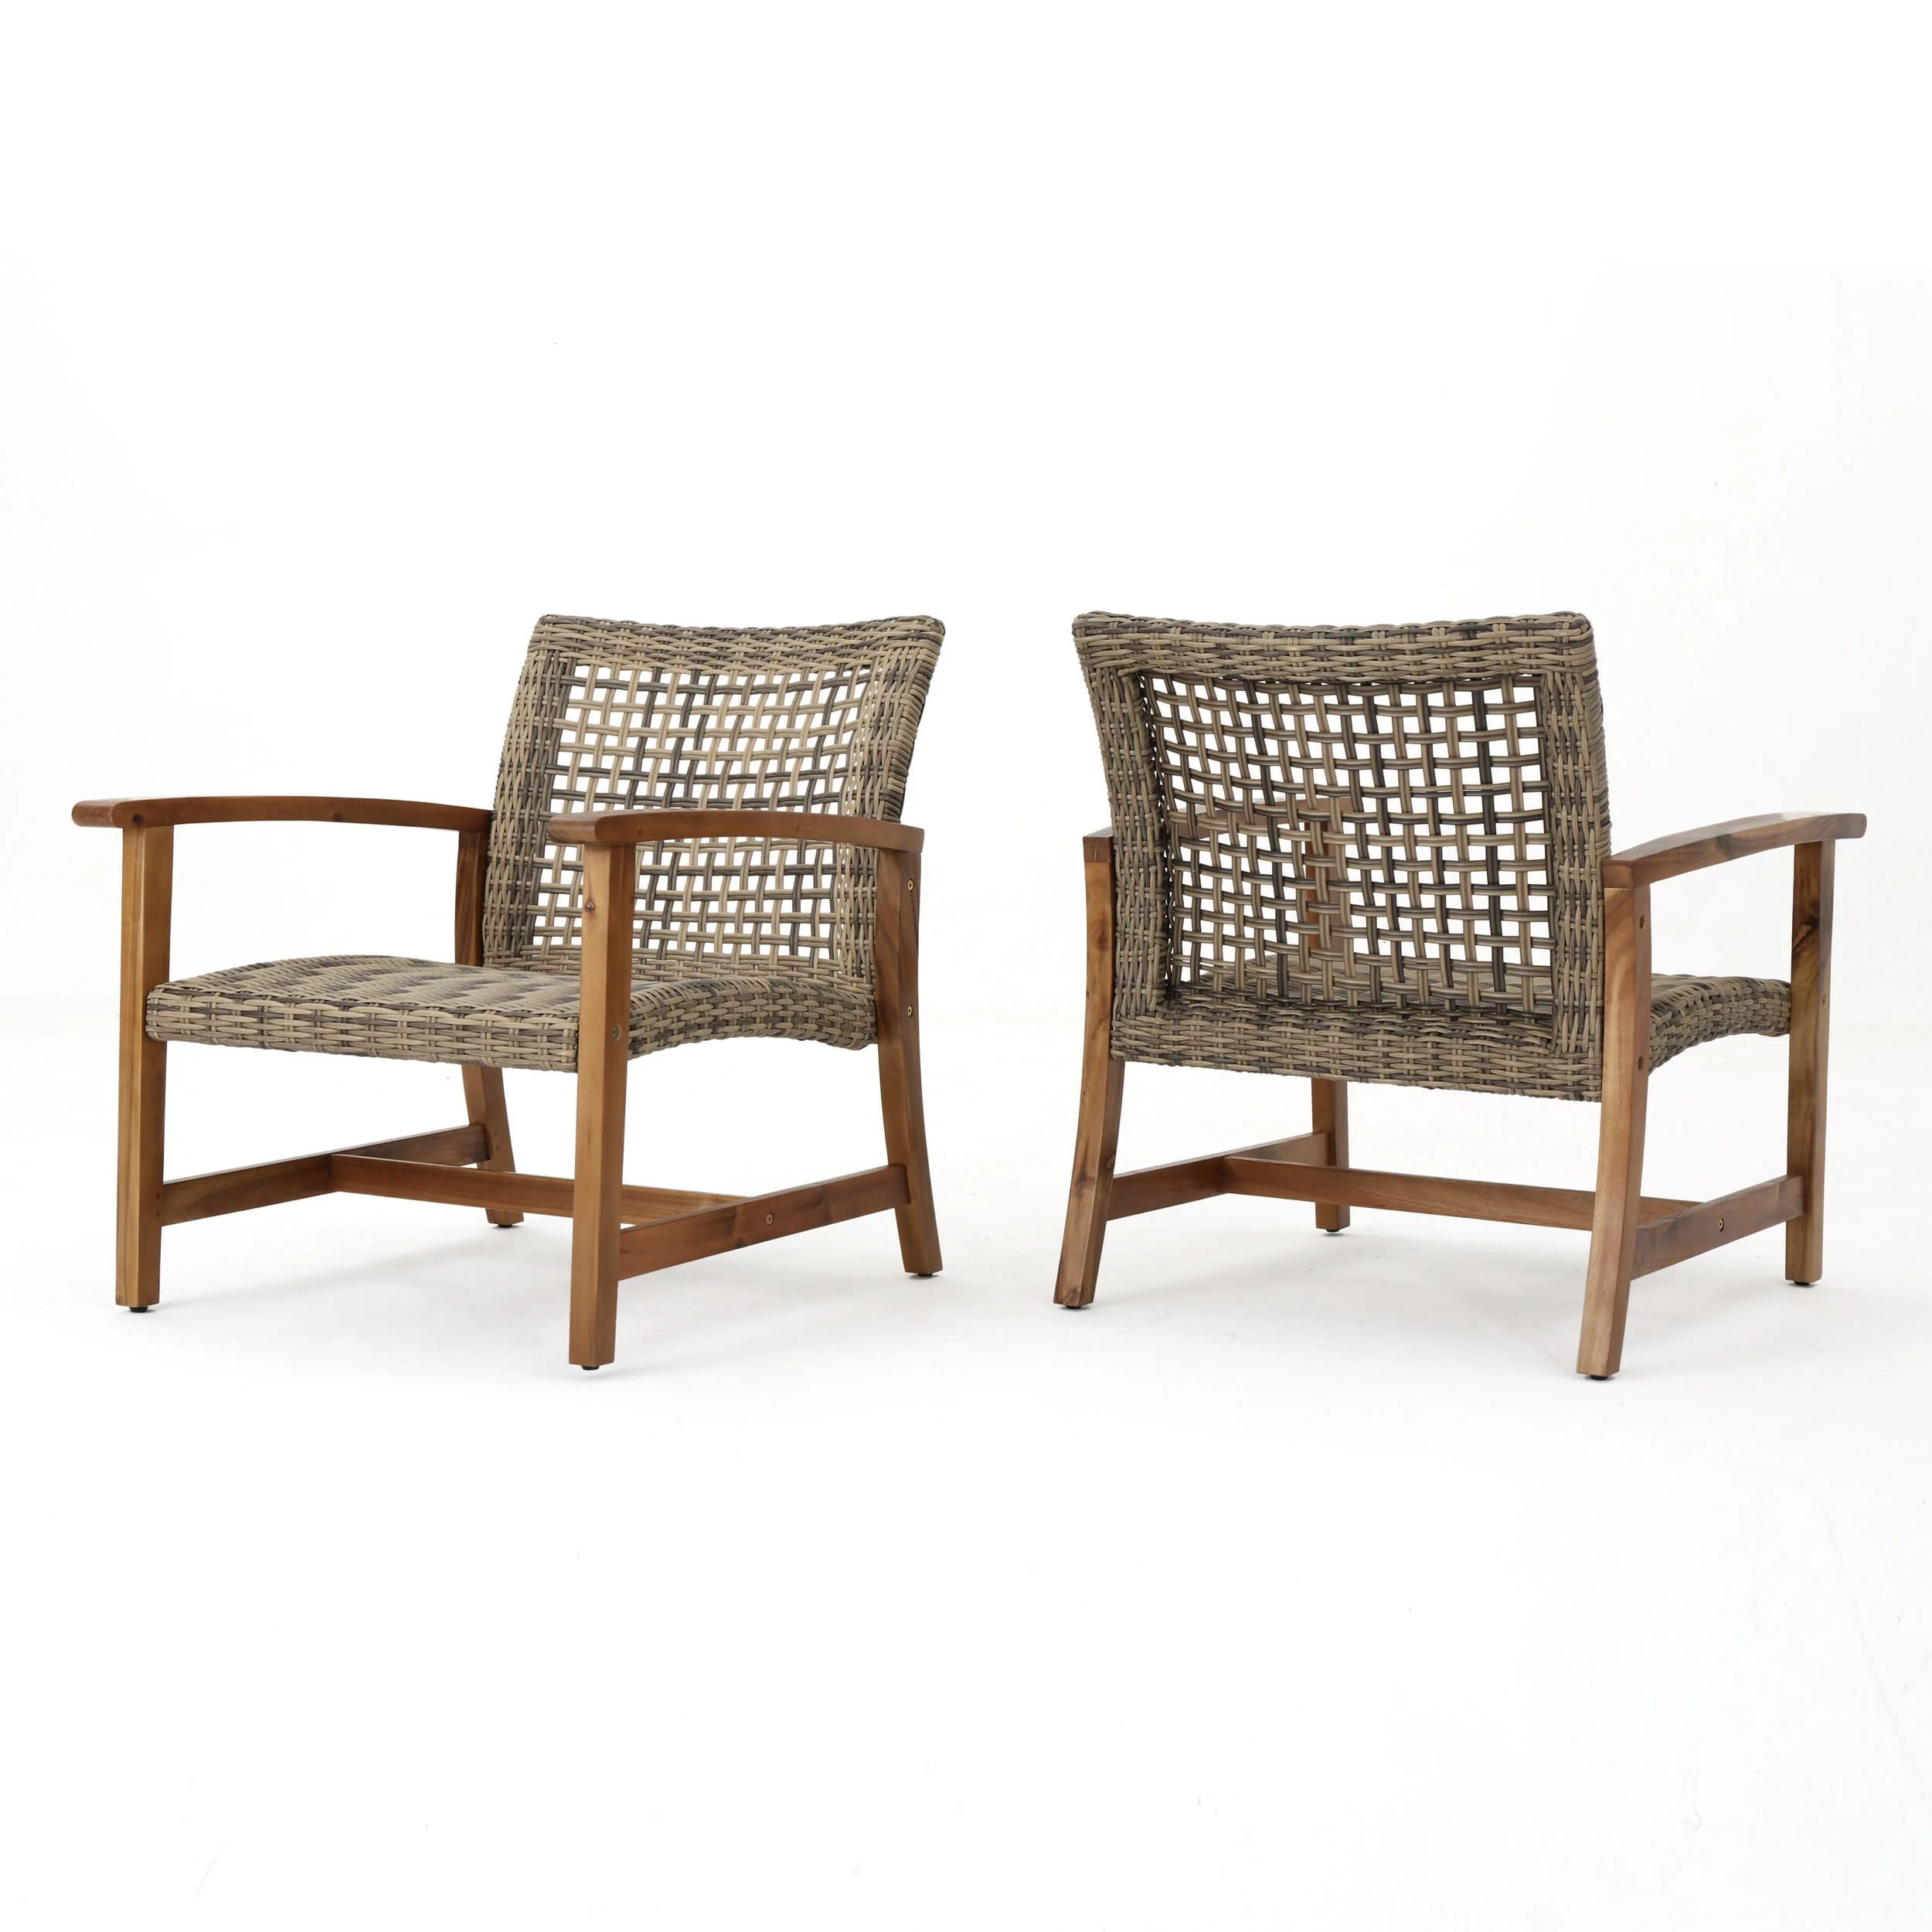 GDF Studio Savannah Outdoor Wood and Wicker Club Chairs, Set of 2, Natural and Gray | Walmart (US)